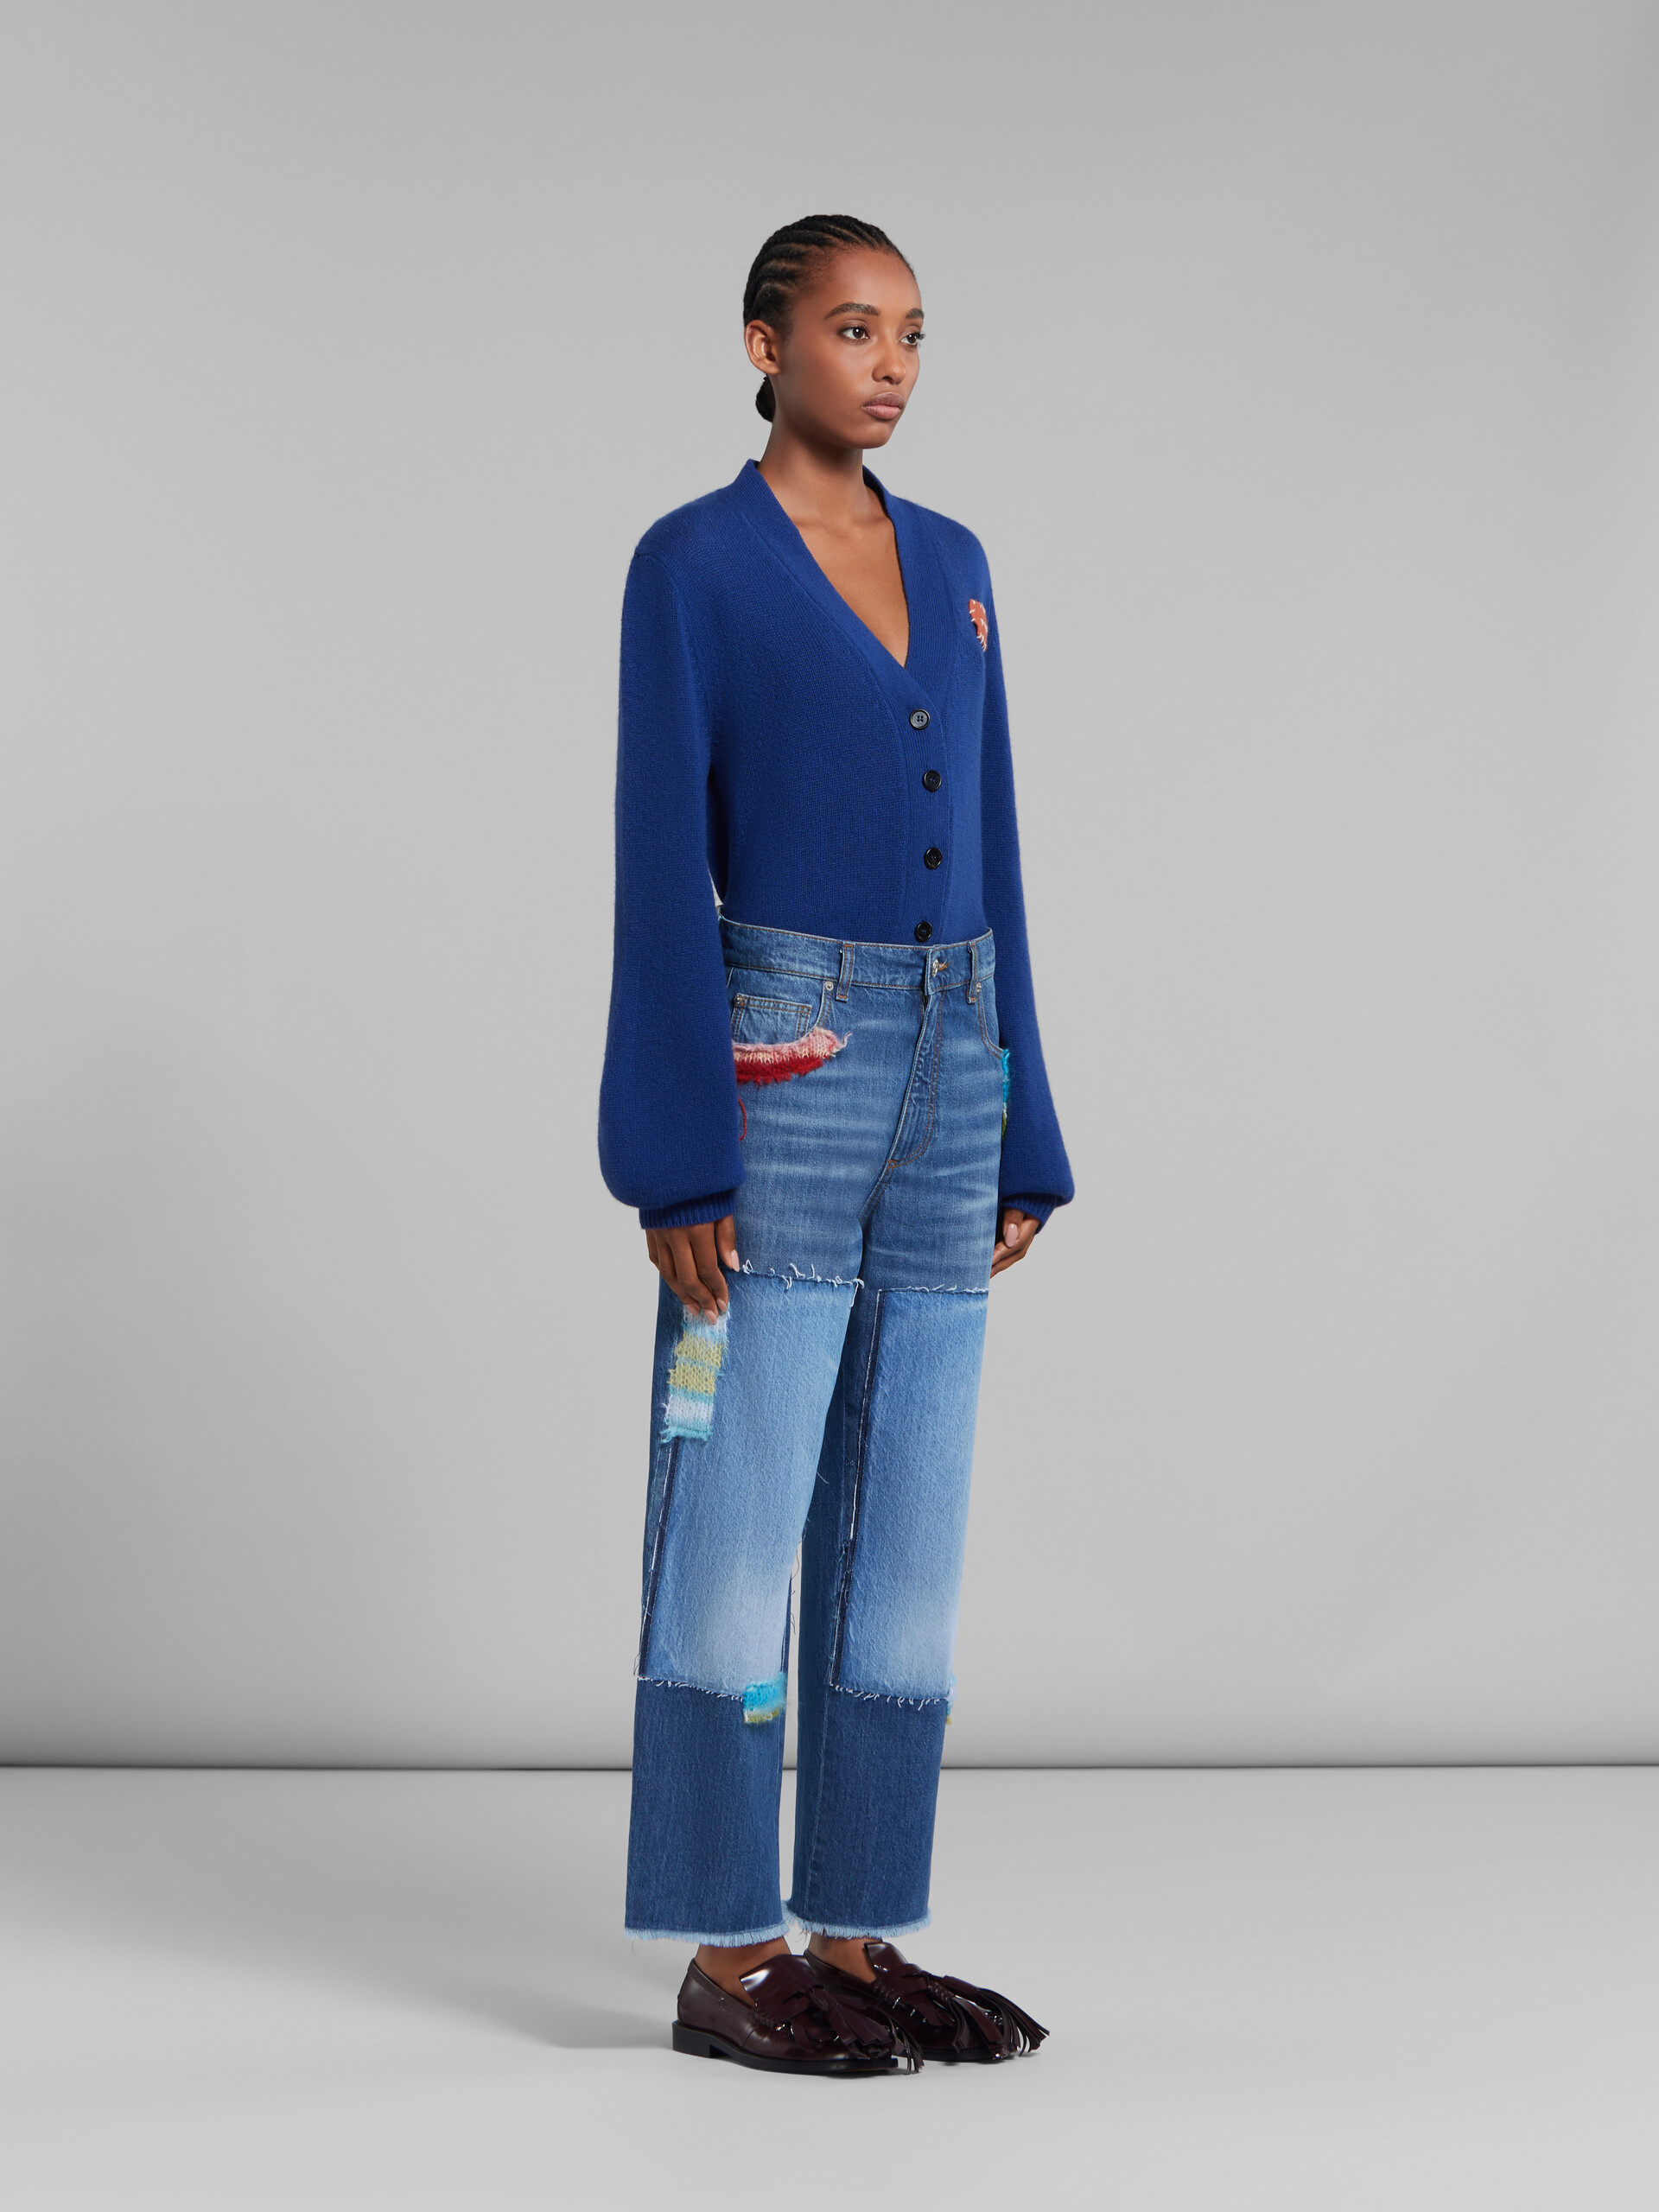 Blue cashmere cardigan with Marni mending patch - Pullovers - Image 5